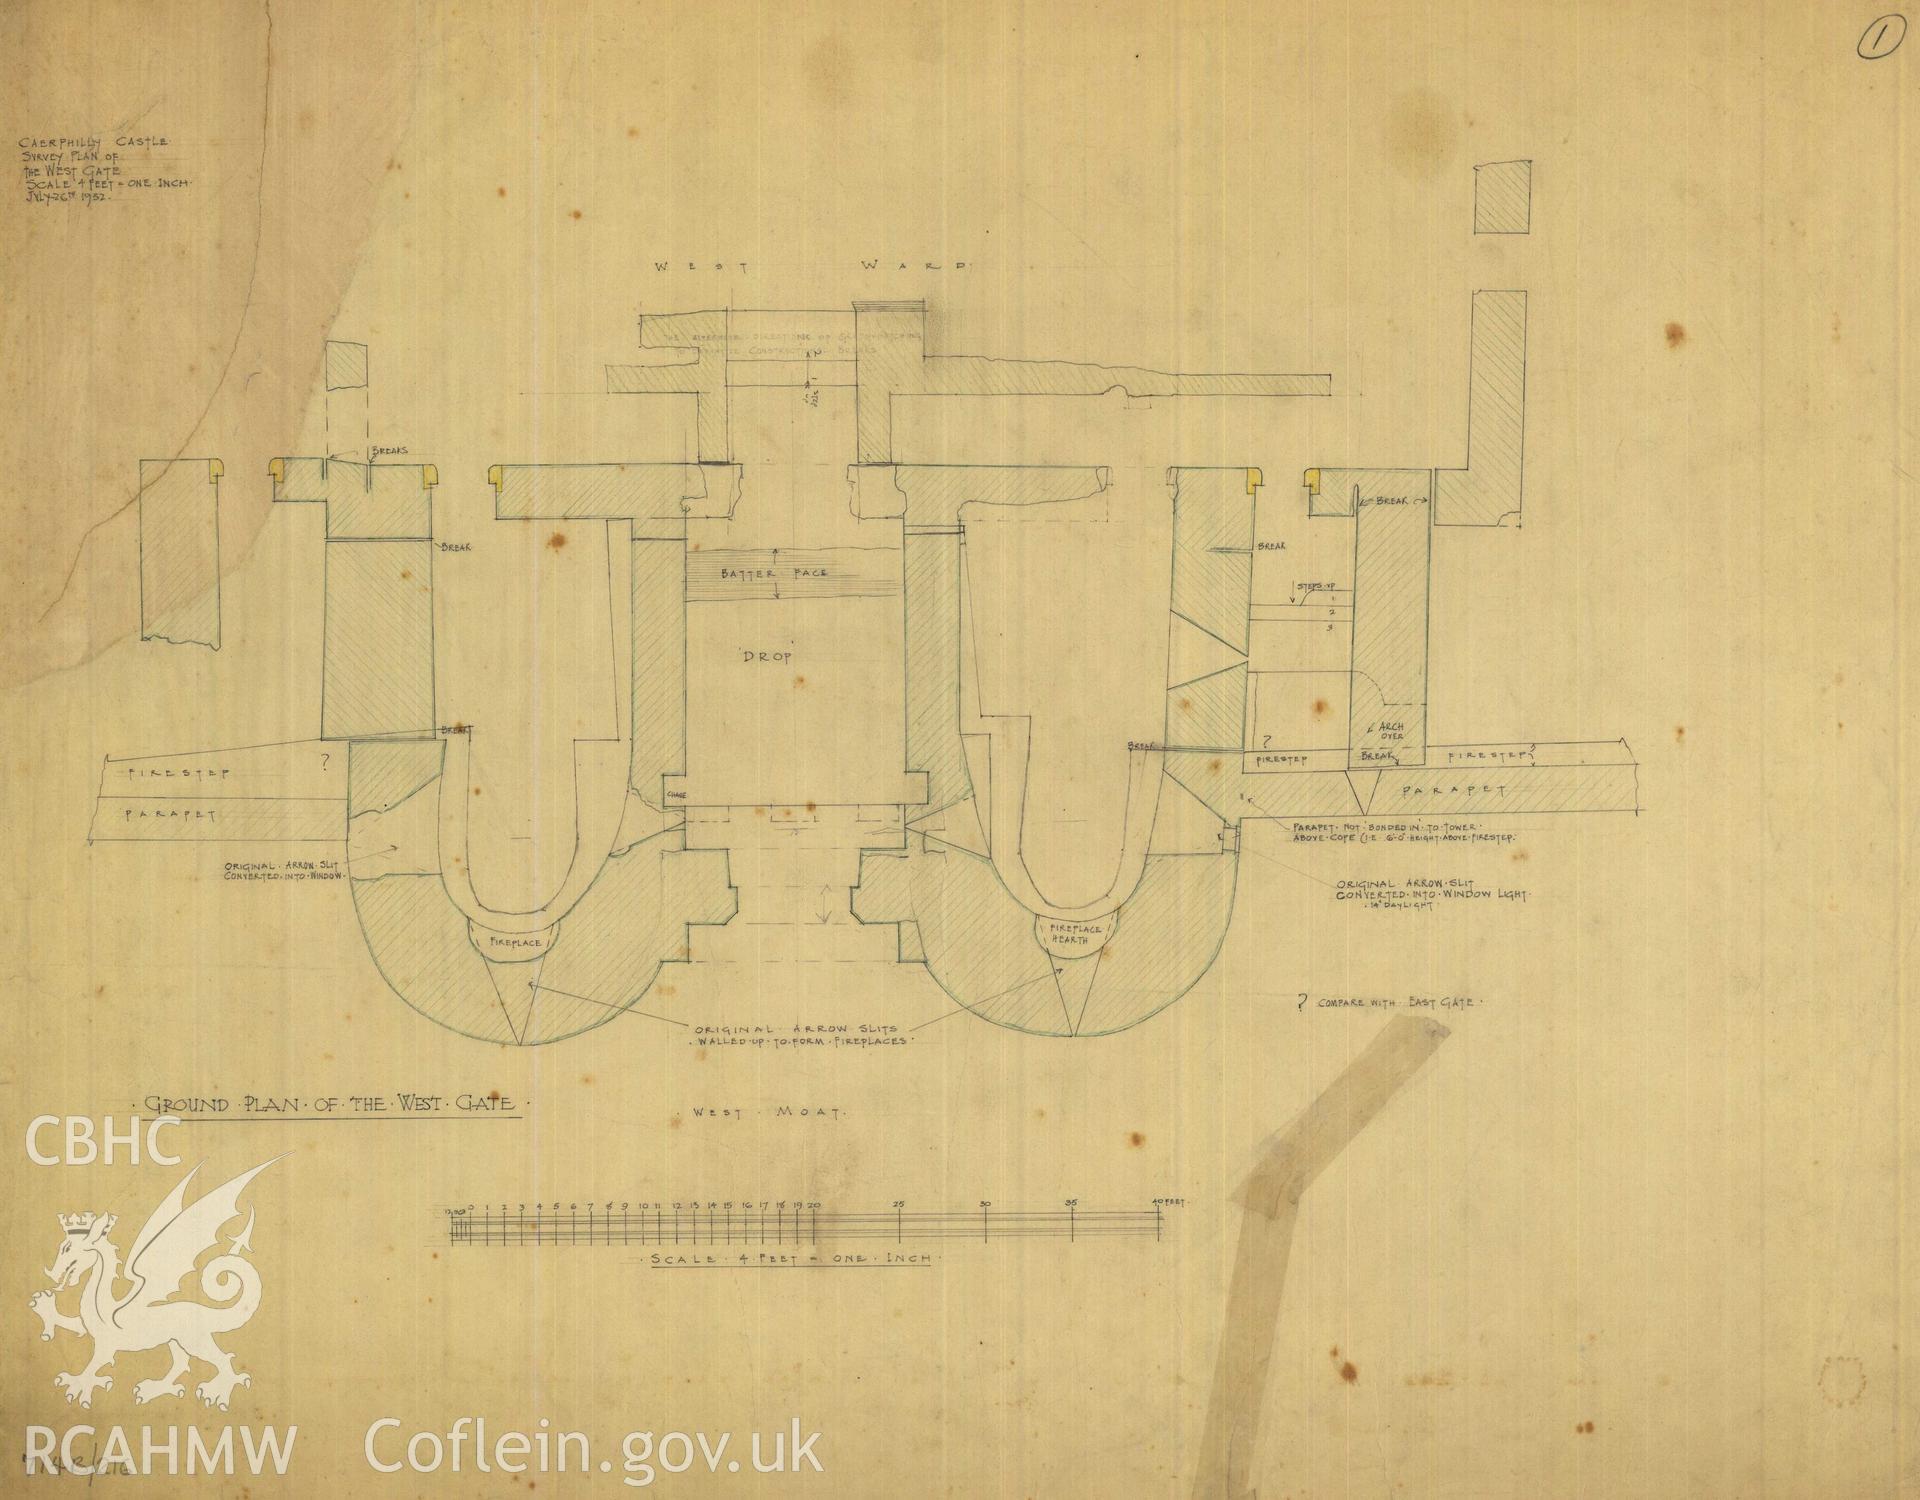 Cadw guardianship monument drawing of Caerphilly Castle. Mid W gate, ground plan. Cadw Ref. No:714B/216. Scale 1:48.